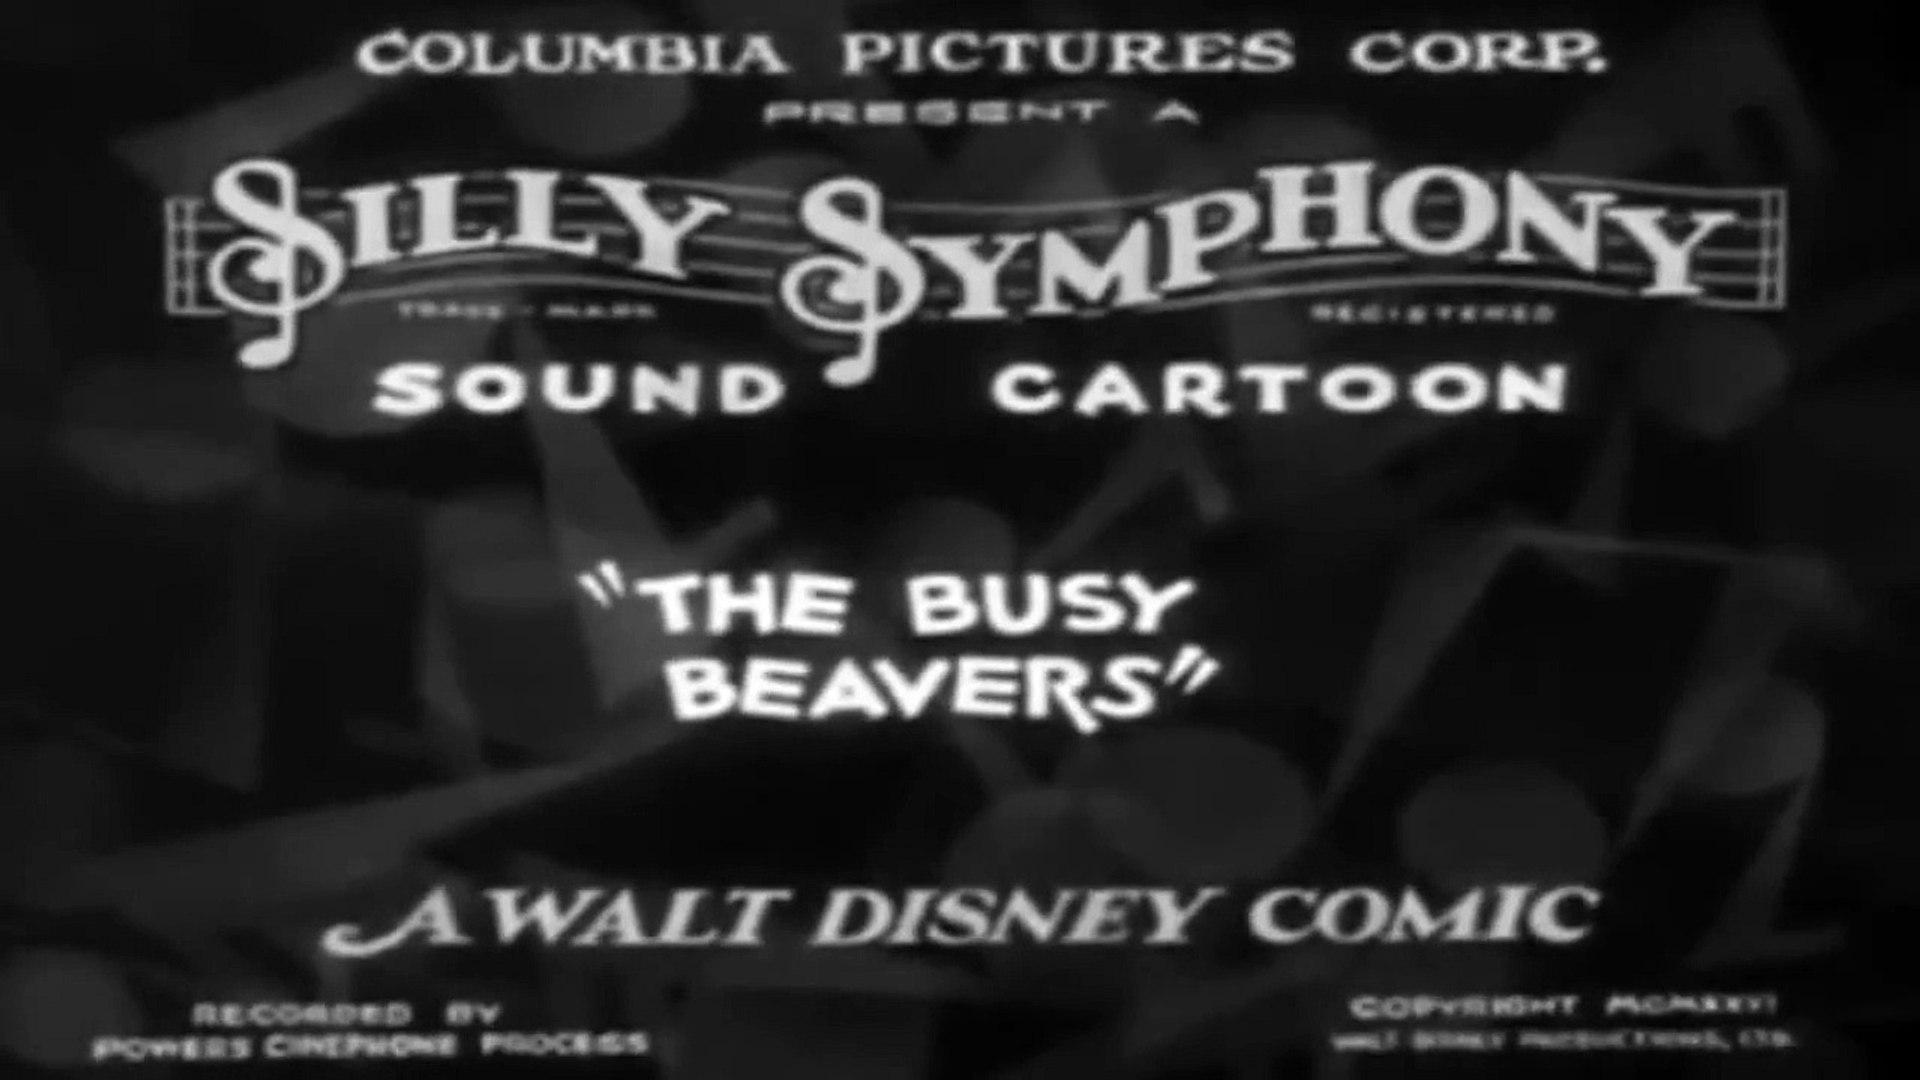 Silly Symphony The Busy Beavers